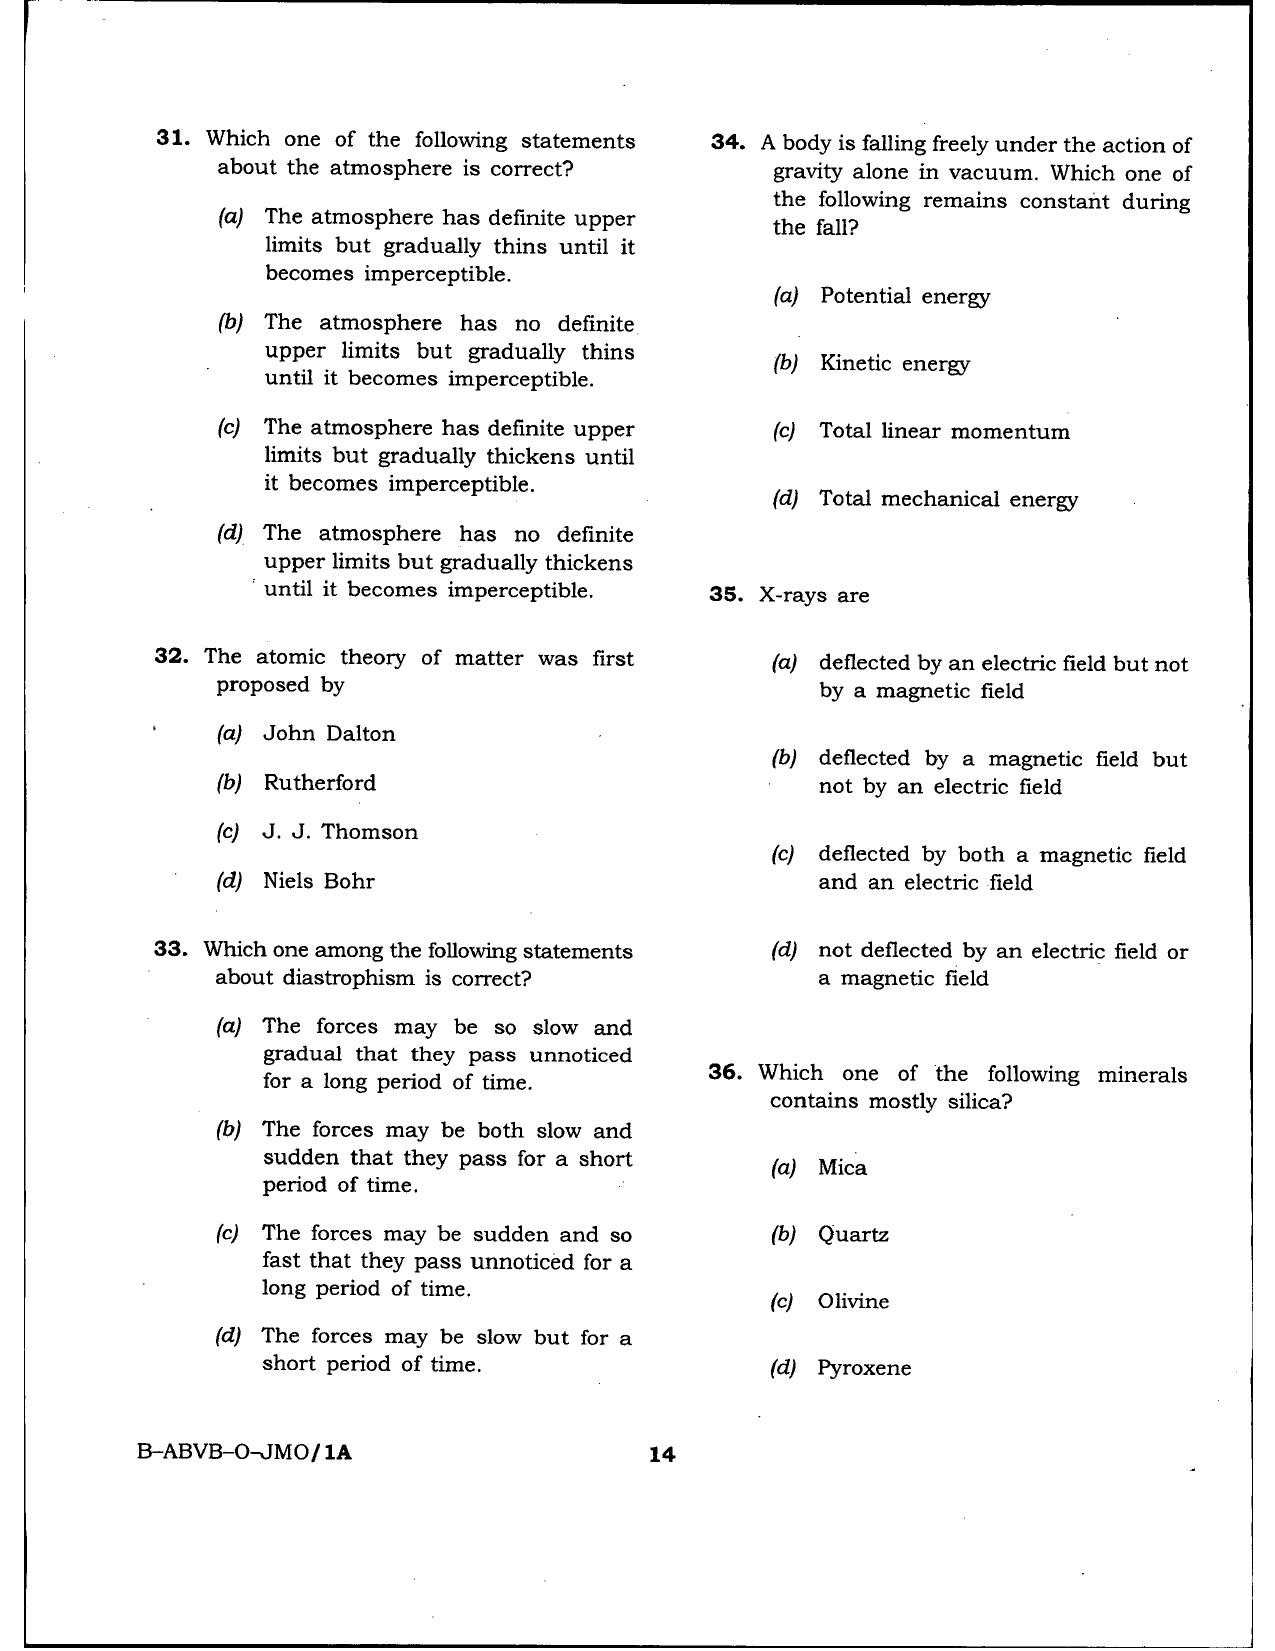 HPSSSB Fitter Model Papers: General Knowledge - Page 14